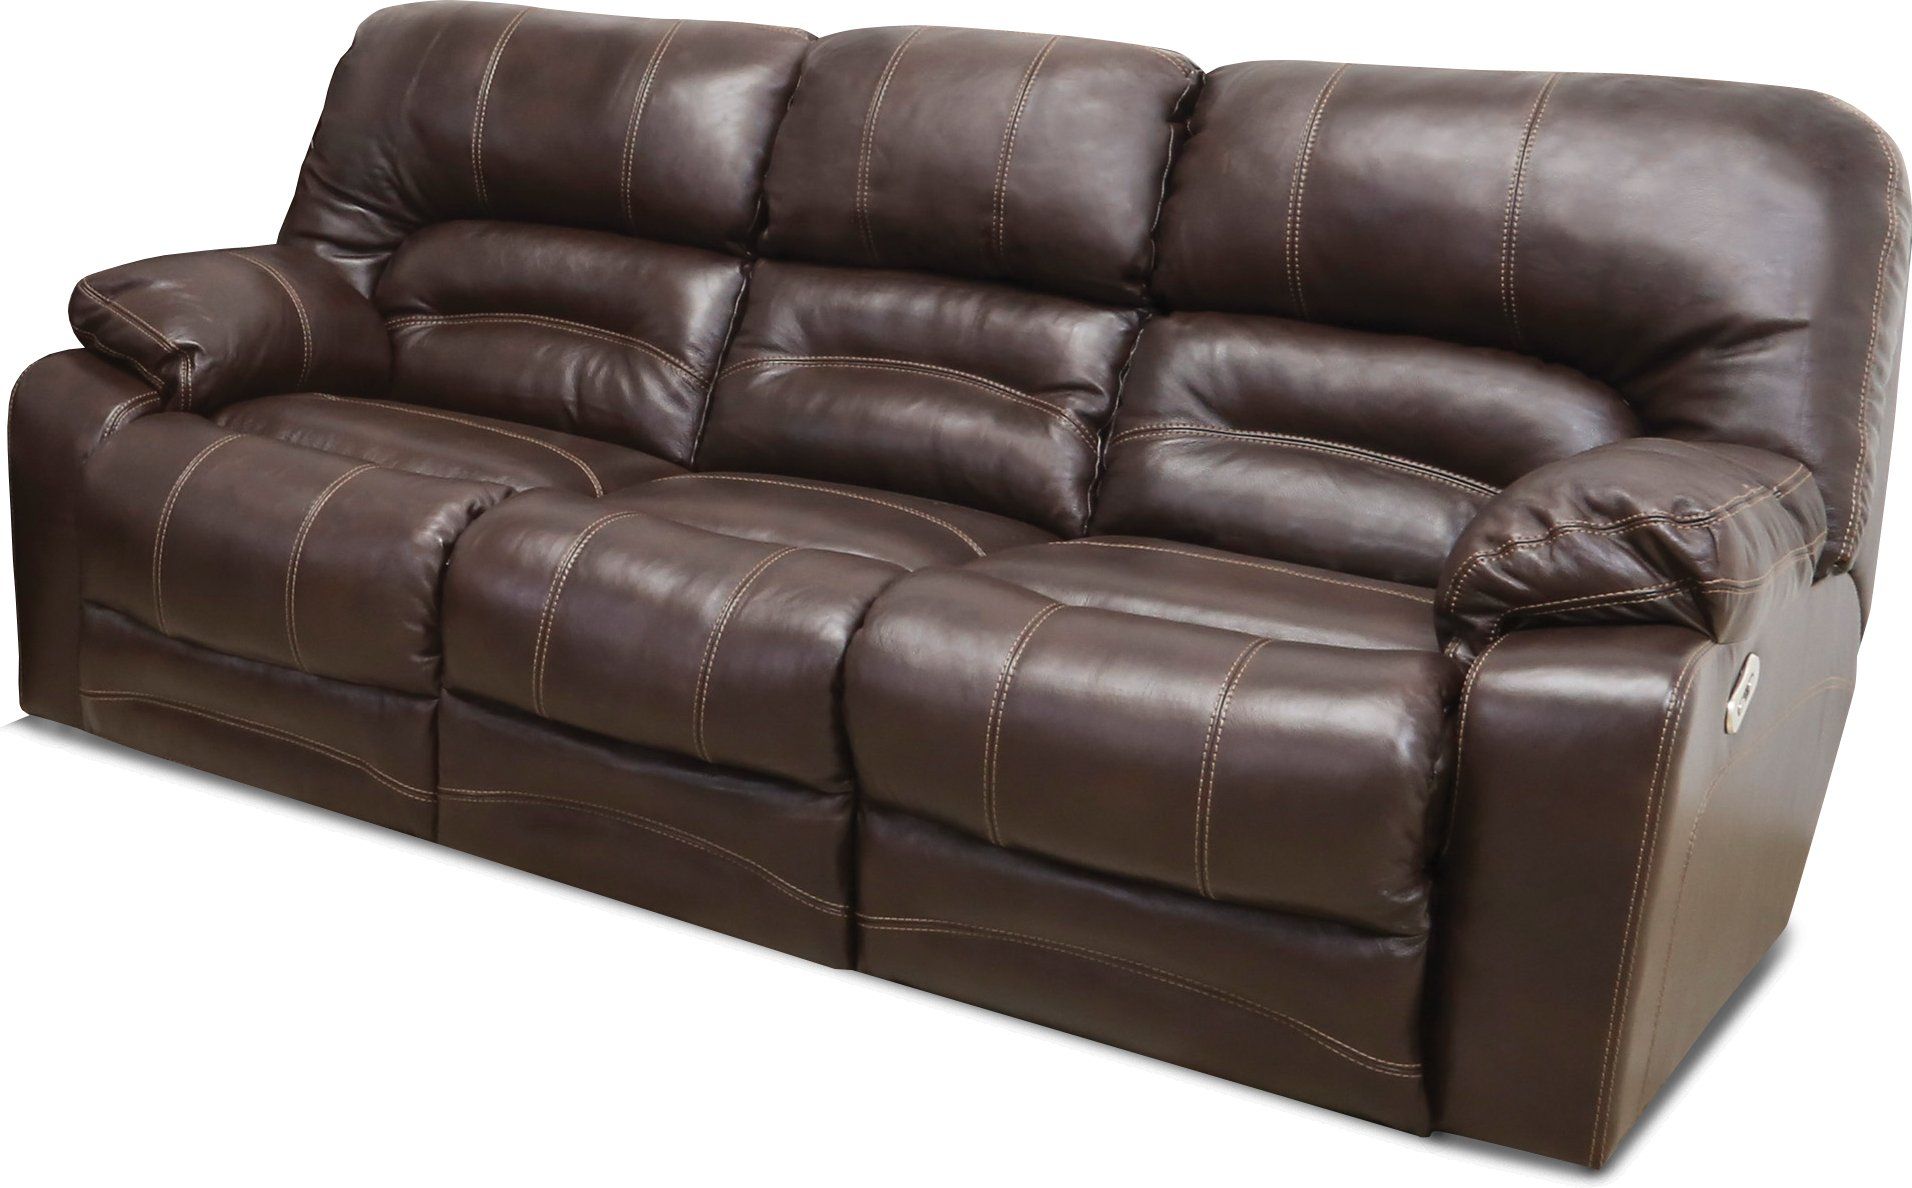 Chocolate Brown Leather Power Reclining Sofa & Loveseat – Legacy | Rc Inside Sofas In Chocolate Brown (View 2 of 20)